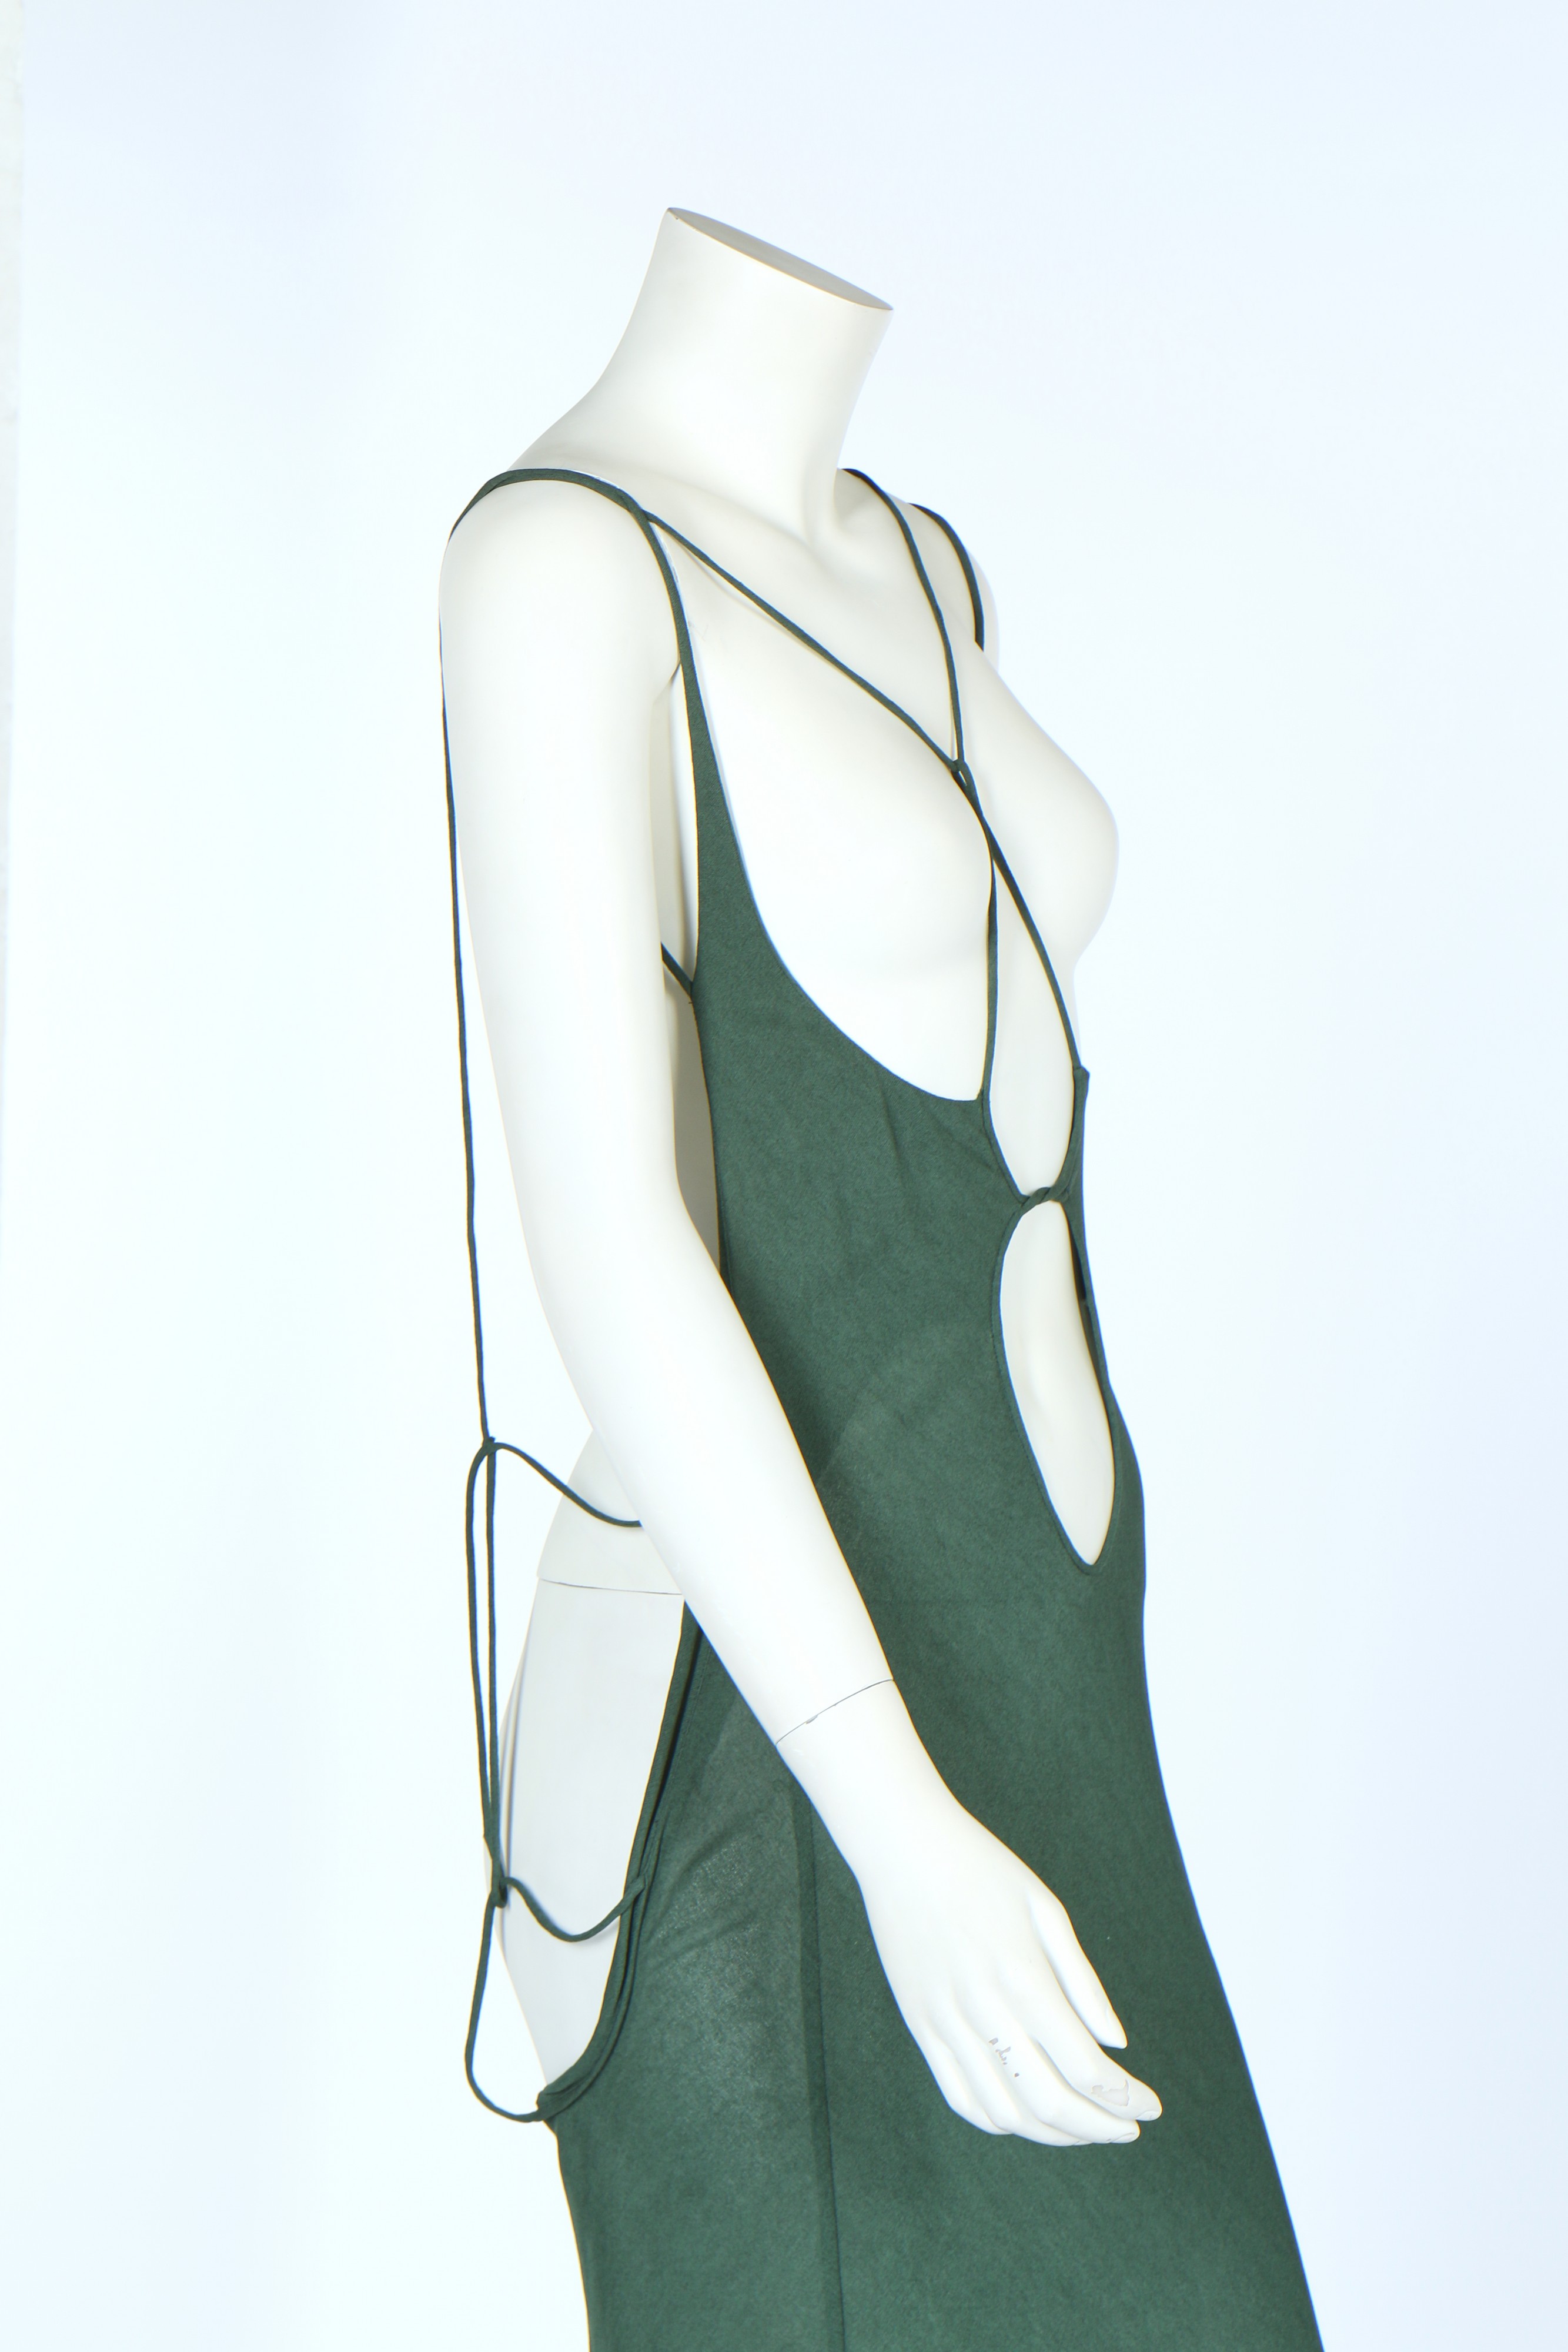 Sold at Auction: A rare John Galliano bias-cut dress and bodice